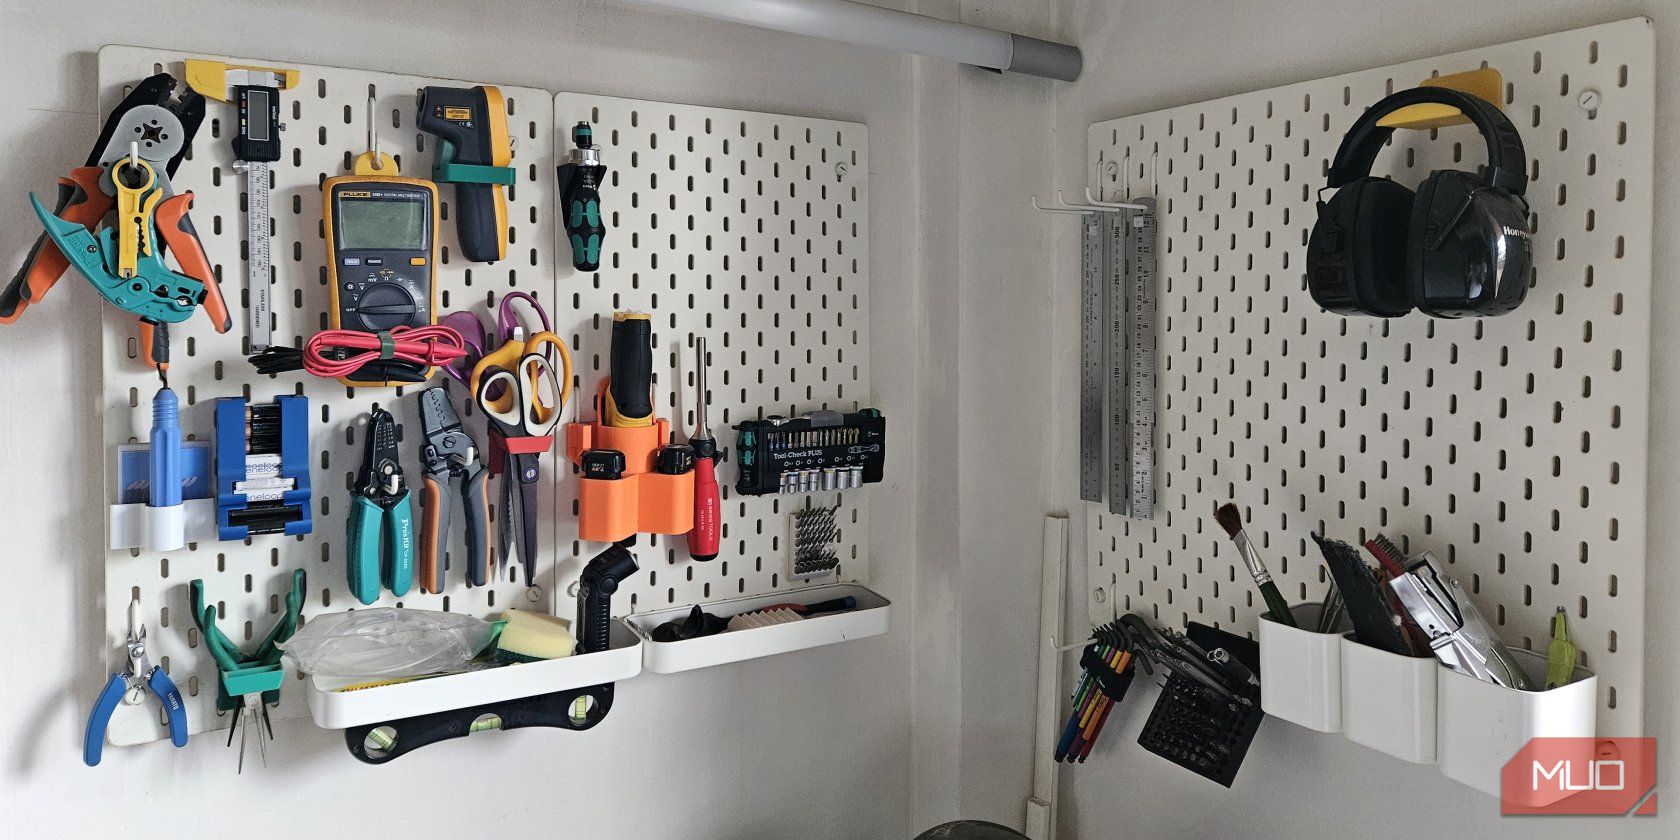 Two IKEA pegboards with several tools mounted onto custom accessories.